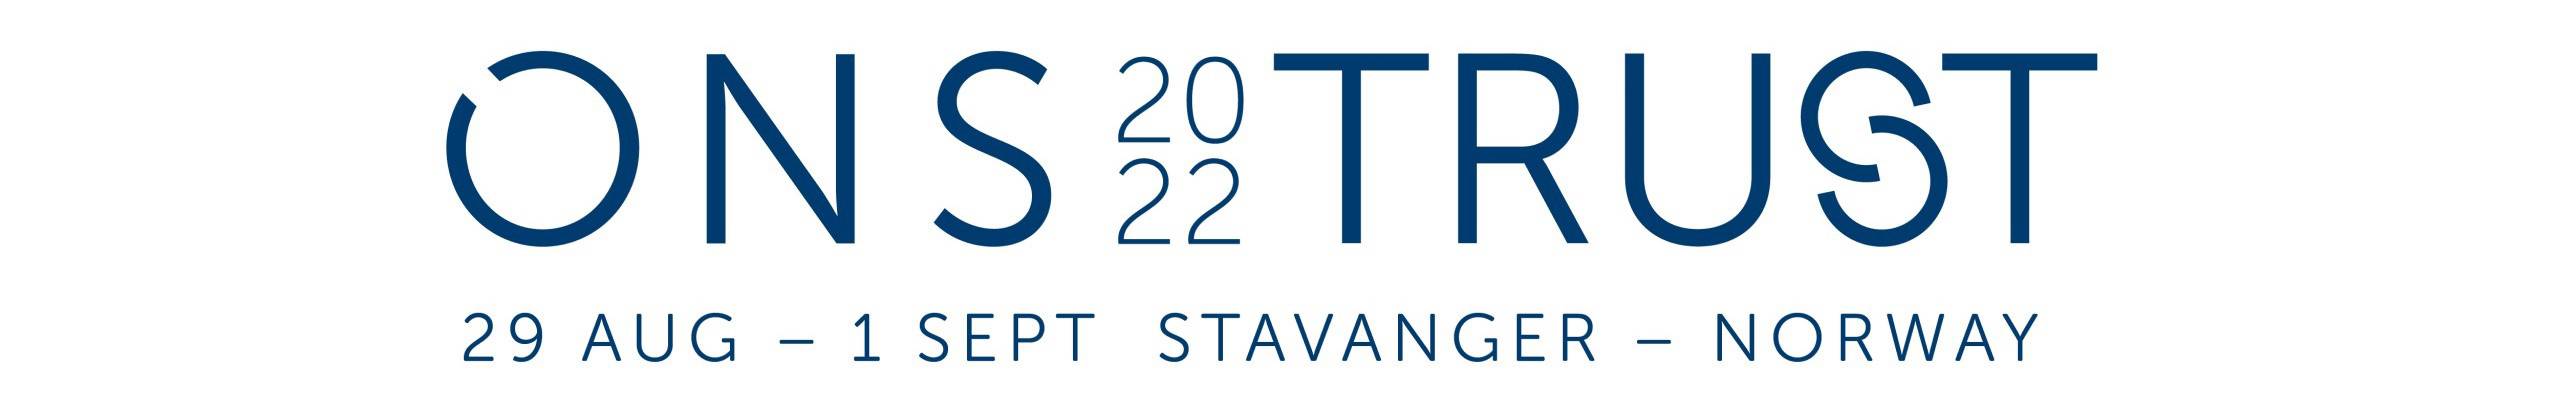 ONS 2022 Trust logo with date and place